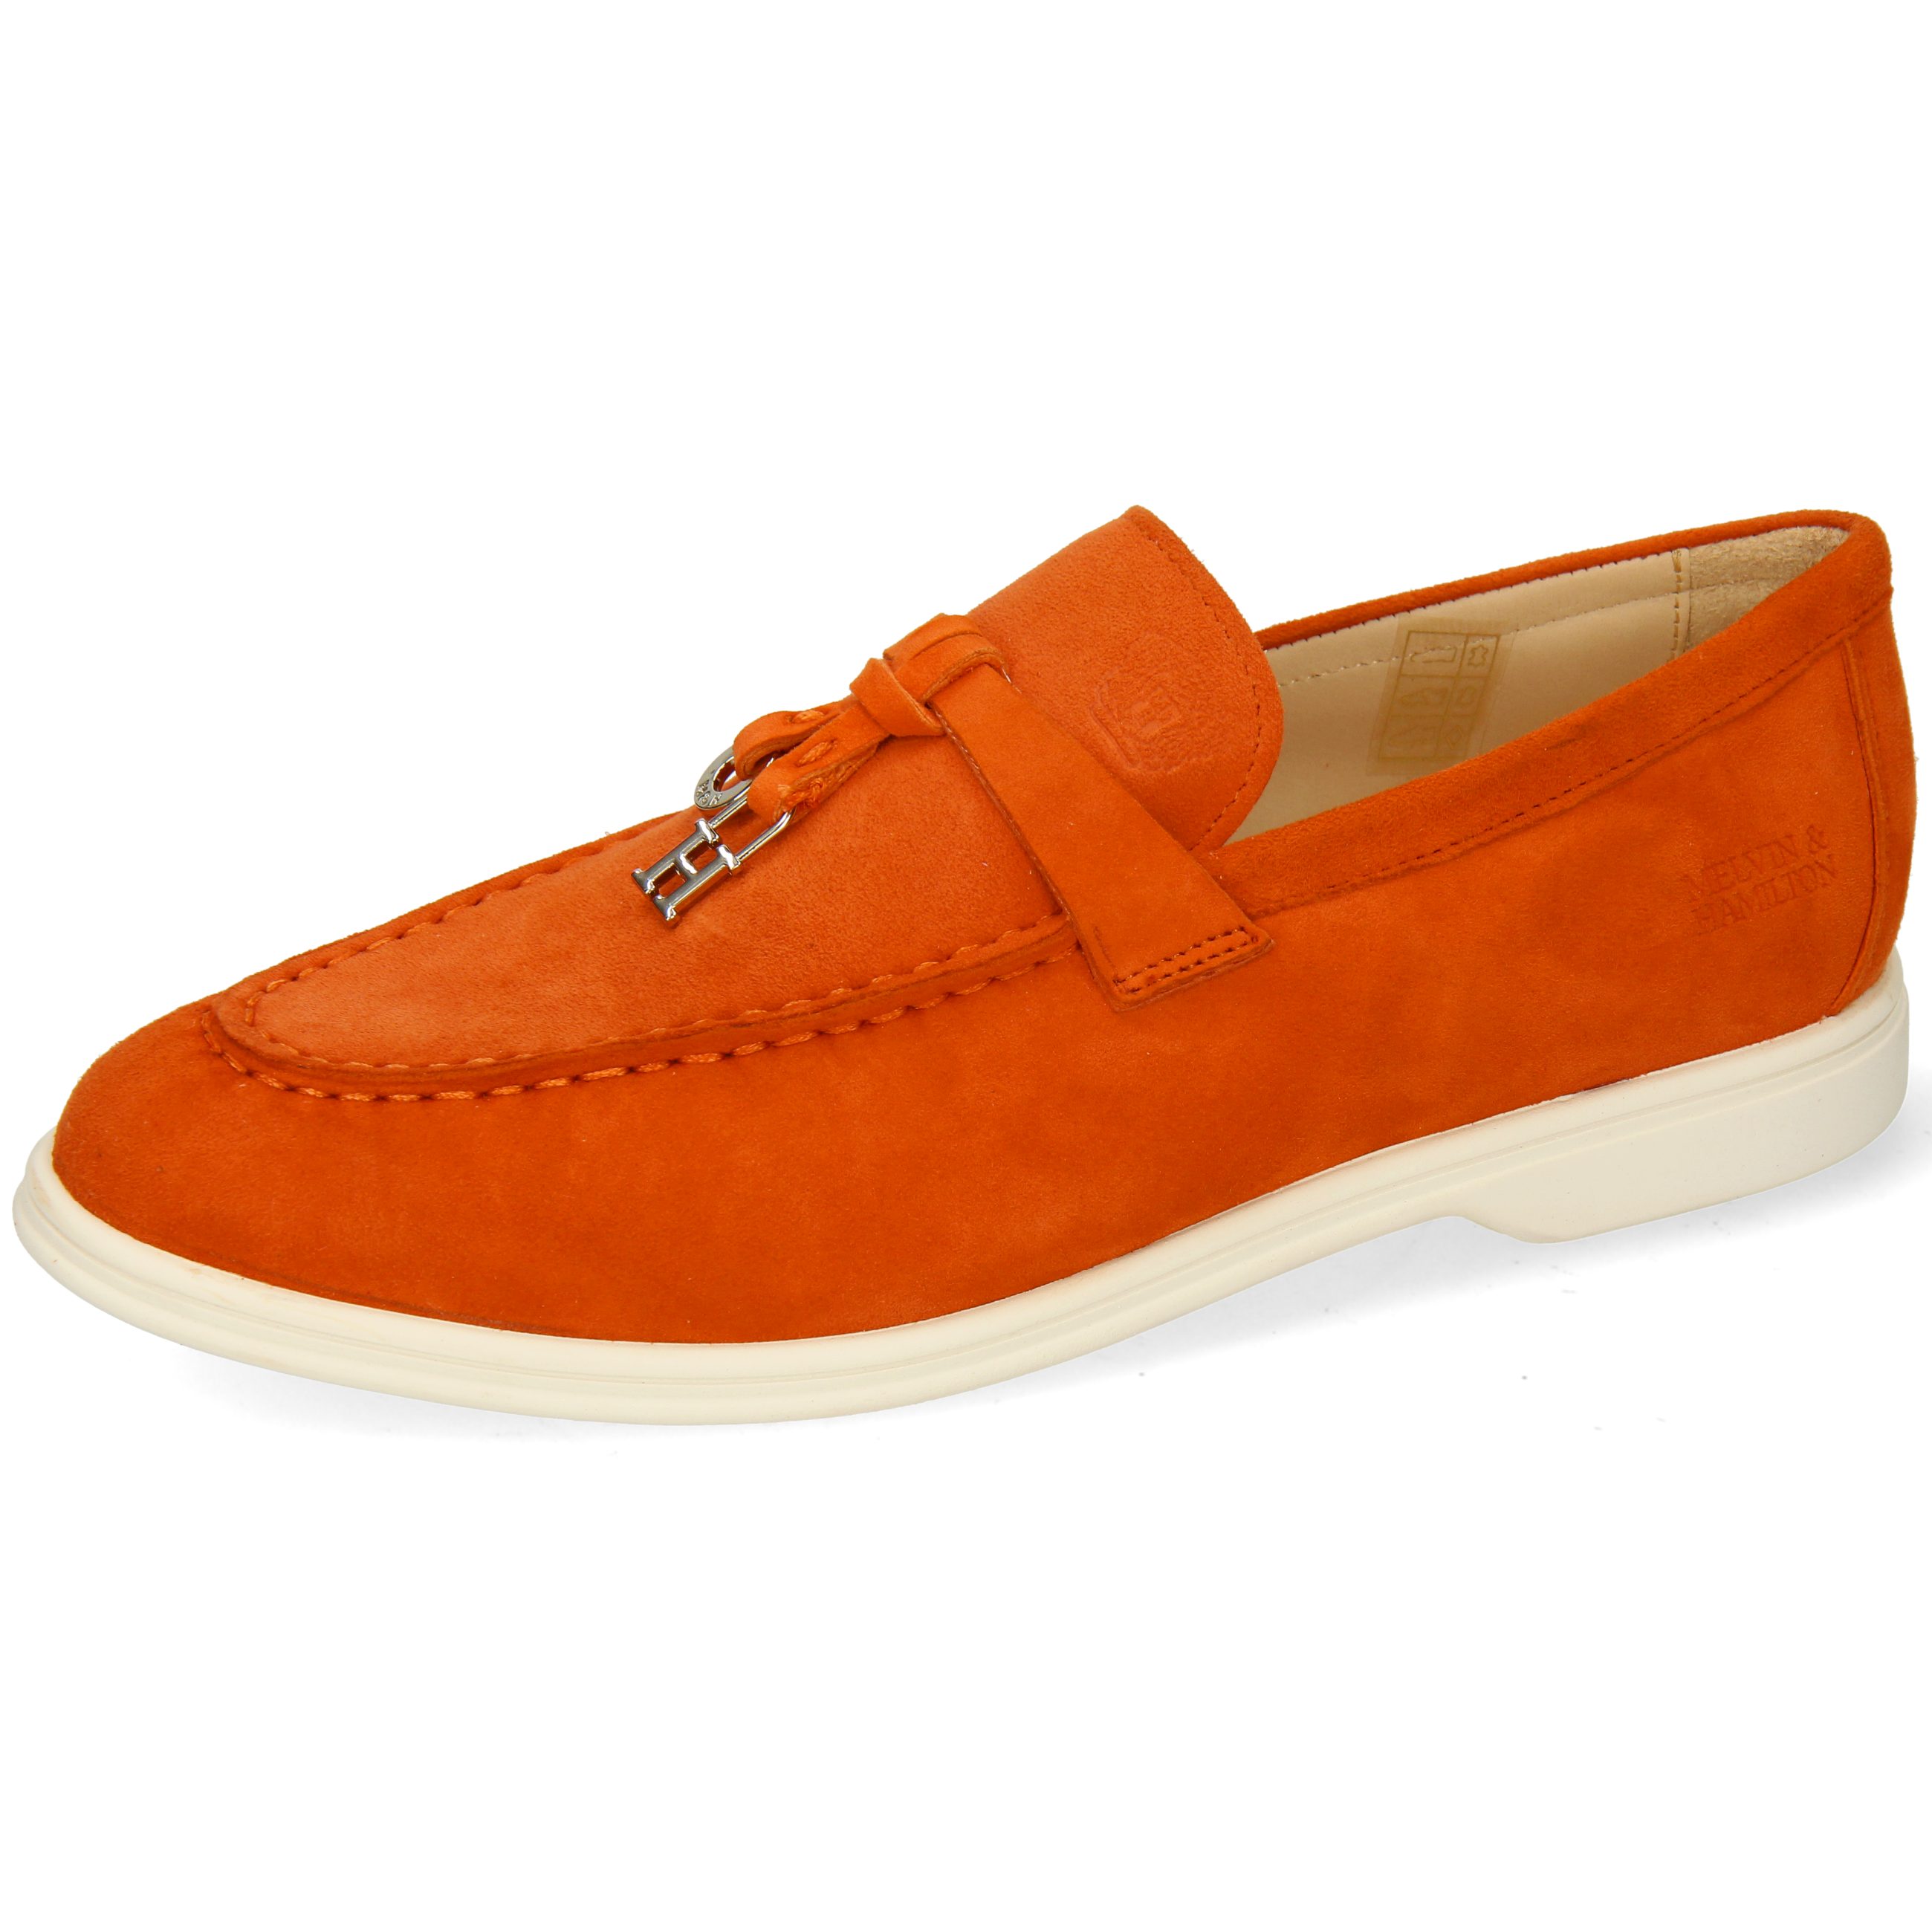 Melvin & Hamilton Adley 3 Loafer Eco Suede Coral Ring